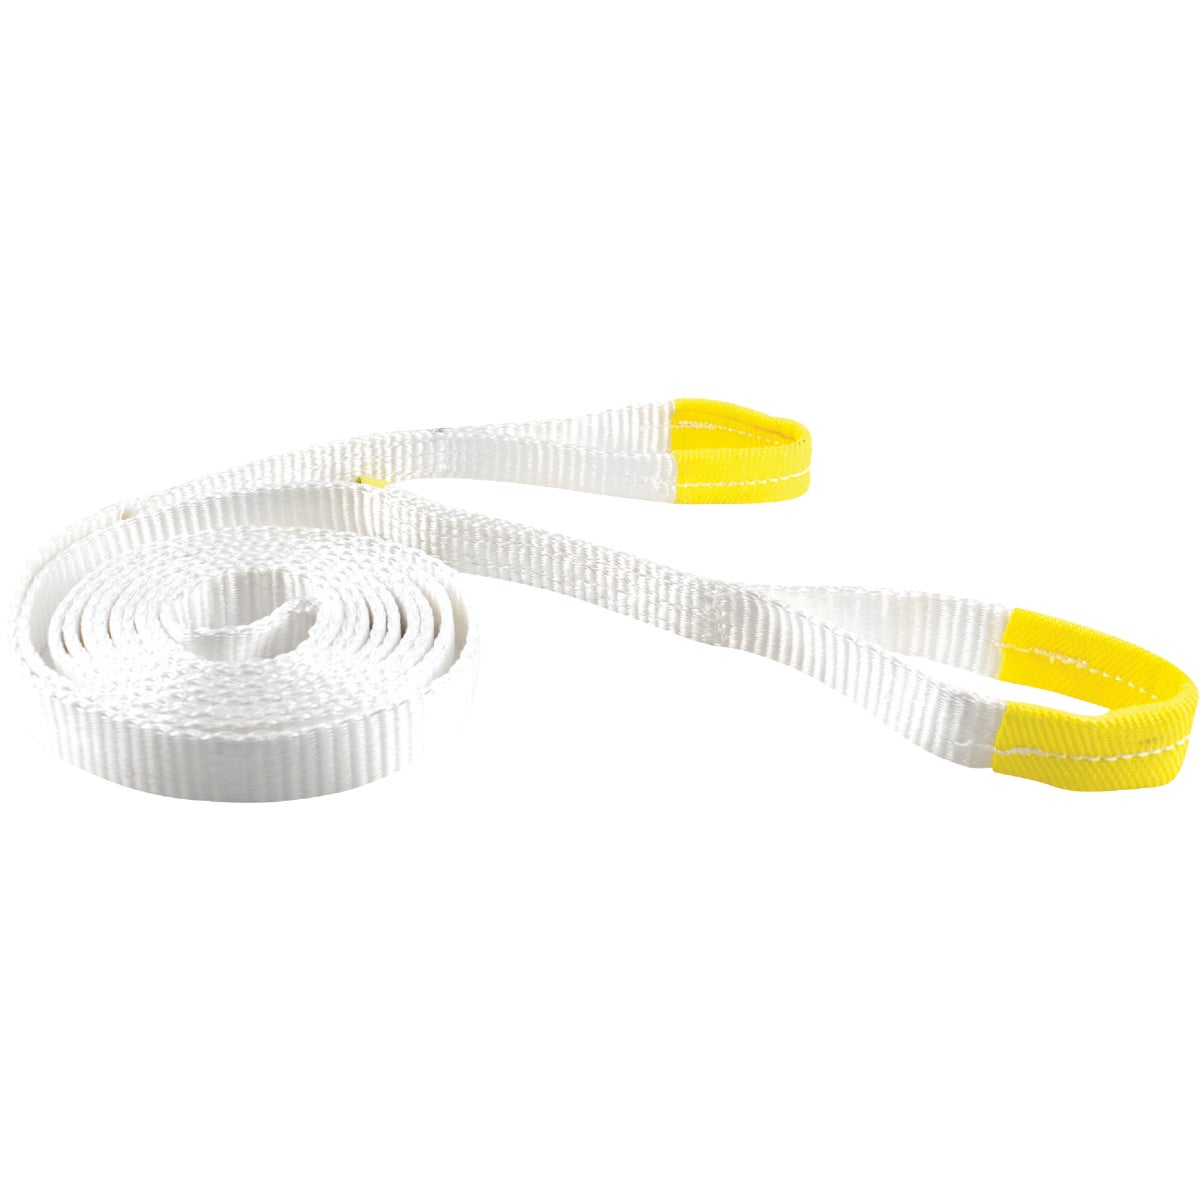 Erickson 1 In. x 15 Ft. 3750 Lb. Polyester Recovery Tow Strap, White